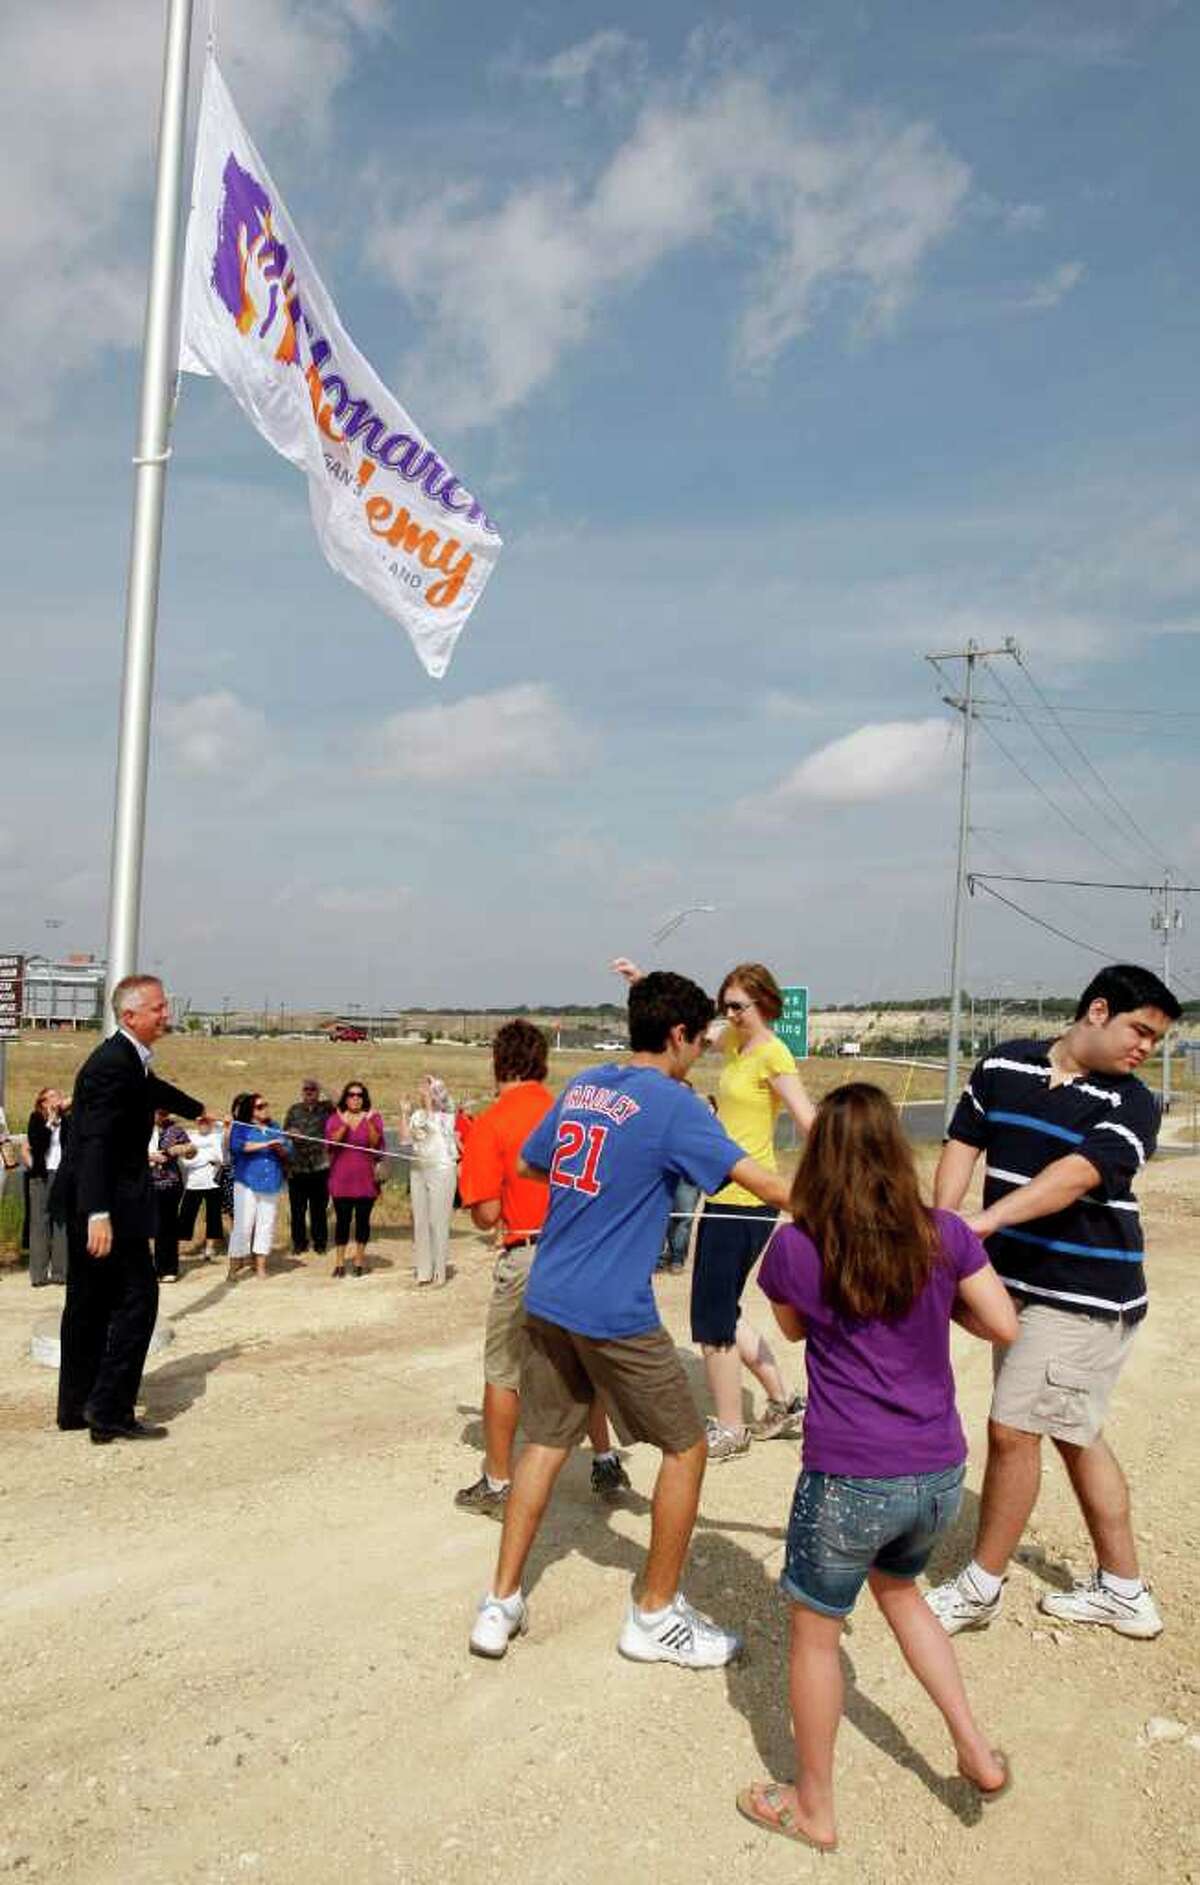 Gordon Hartman (left) guides special needs students as they raise the flag for the Monarch Academy. The school, for special needs students, will sit on 2.3 acres next to the 25-acres Morgan's Wonderland. It is scheduled to open this August 22 and will start with a student body of 35. It is accepting applications for students between the sixth grade and 18 years of age as of Sept. 1, 2011. Although construction for the school is just starting, classes will begin in portable buildings. JERRY LARA/glara@express-news.net